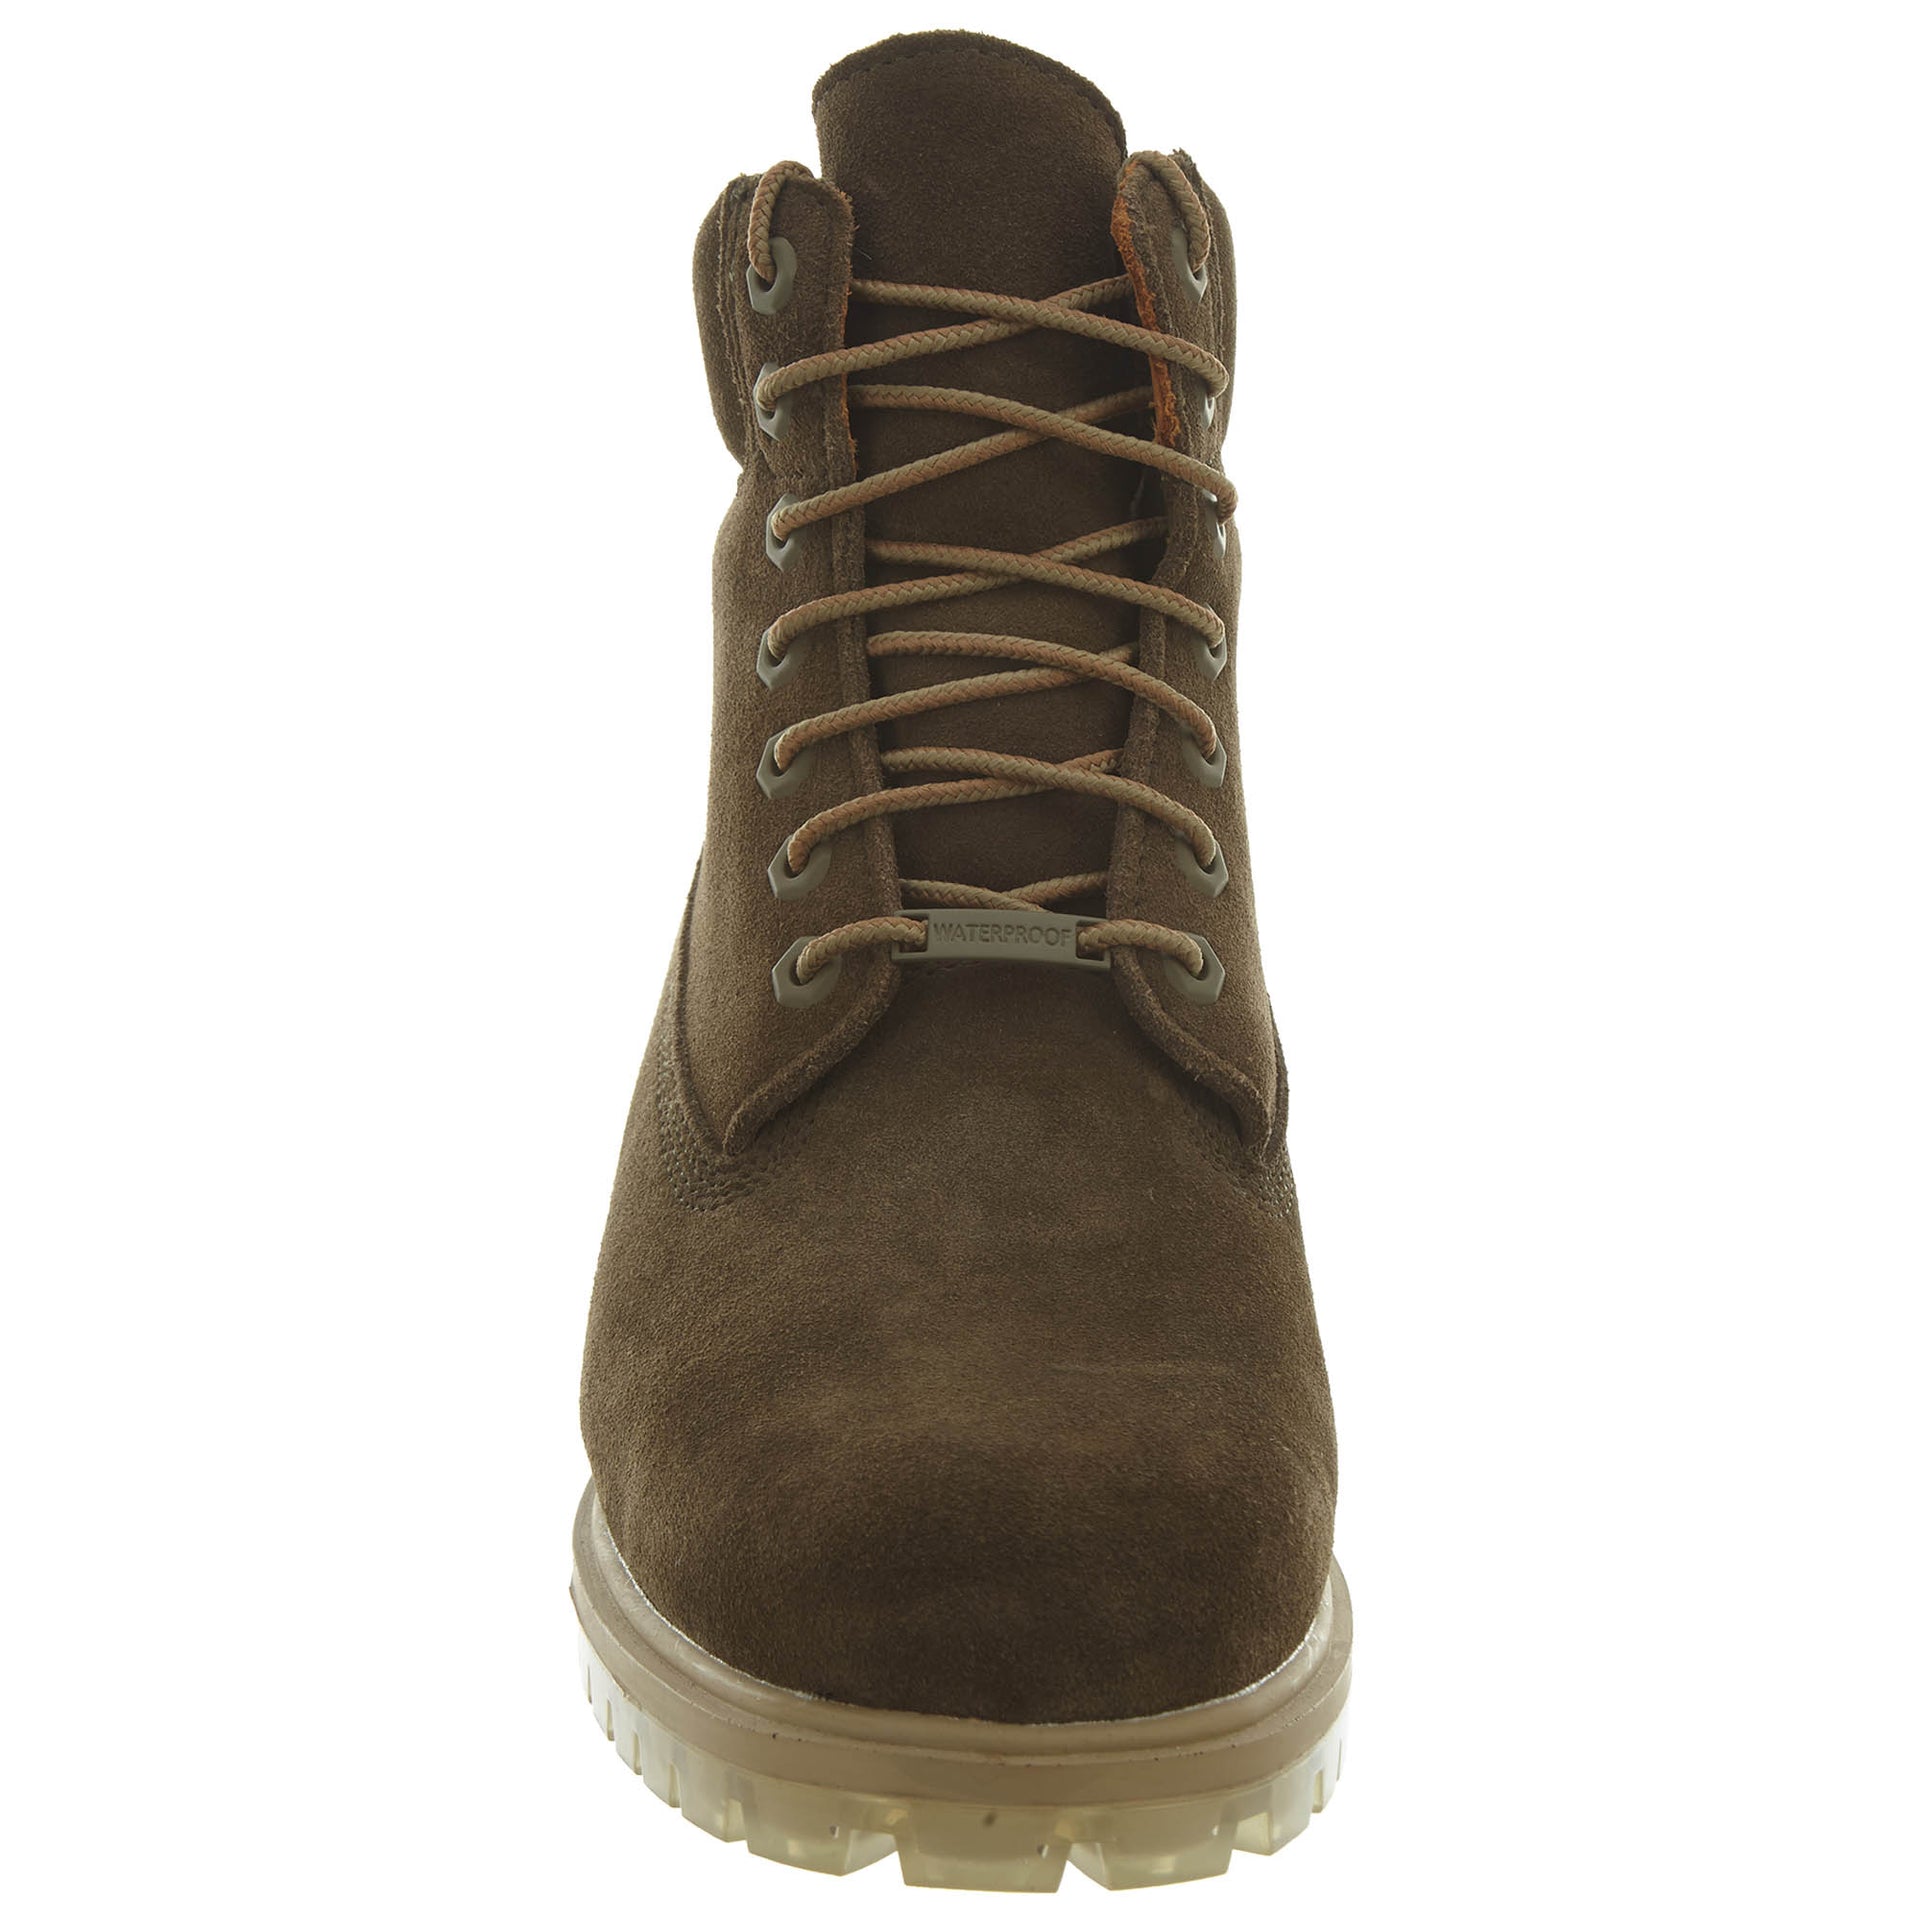 Timberland 6" Premium Boot Mens Style : Tb0a18pz